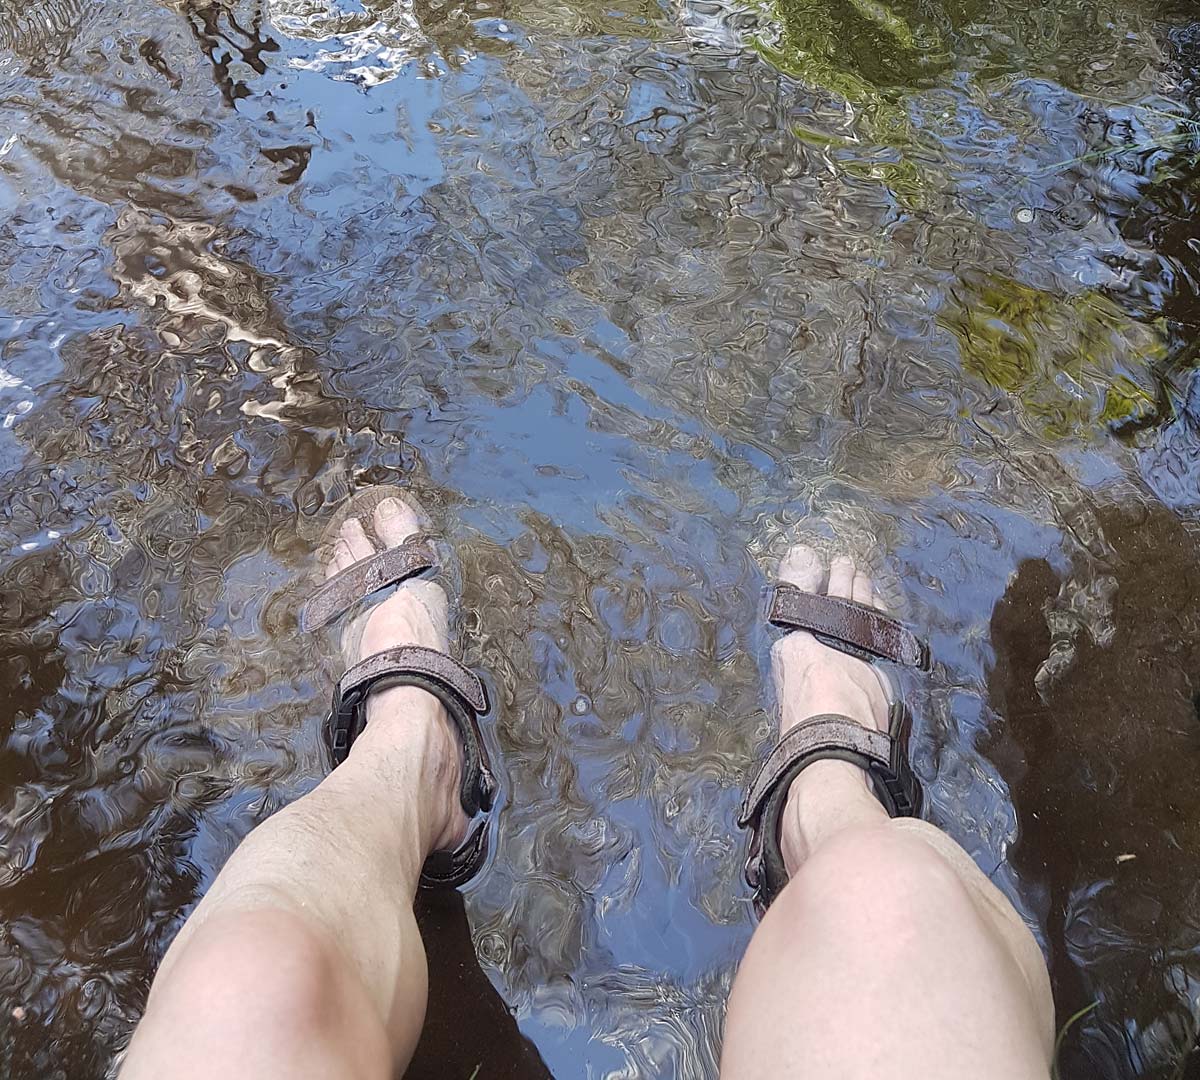 Cooling your feet in the river on a very hot day.